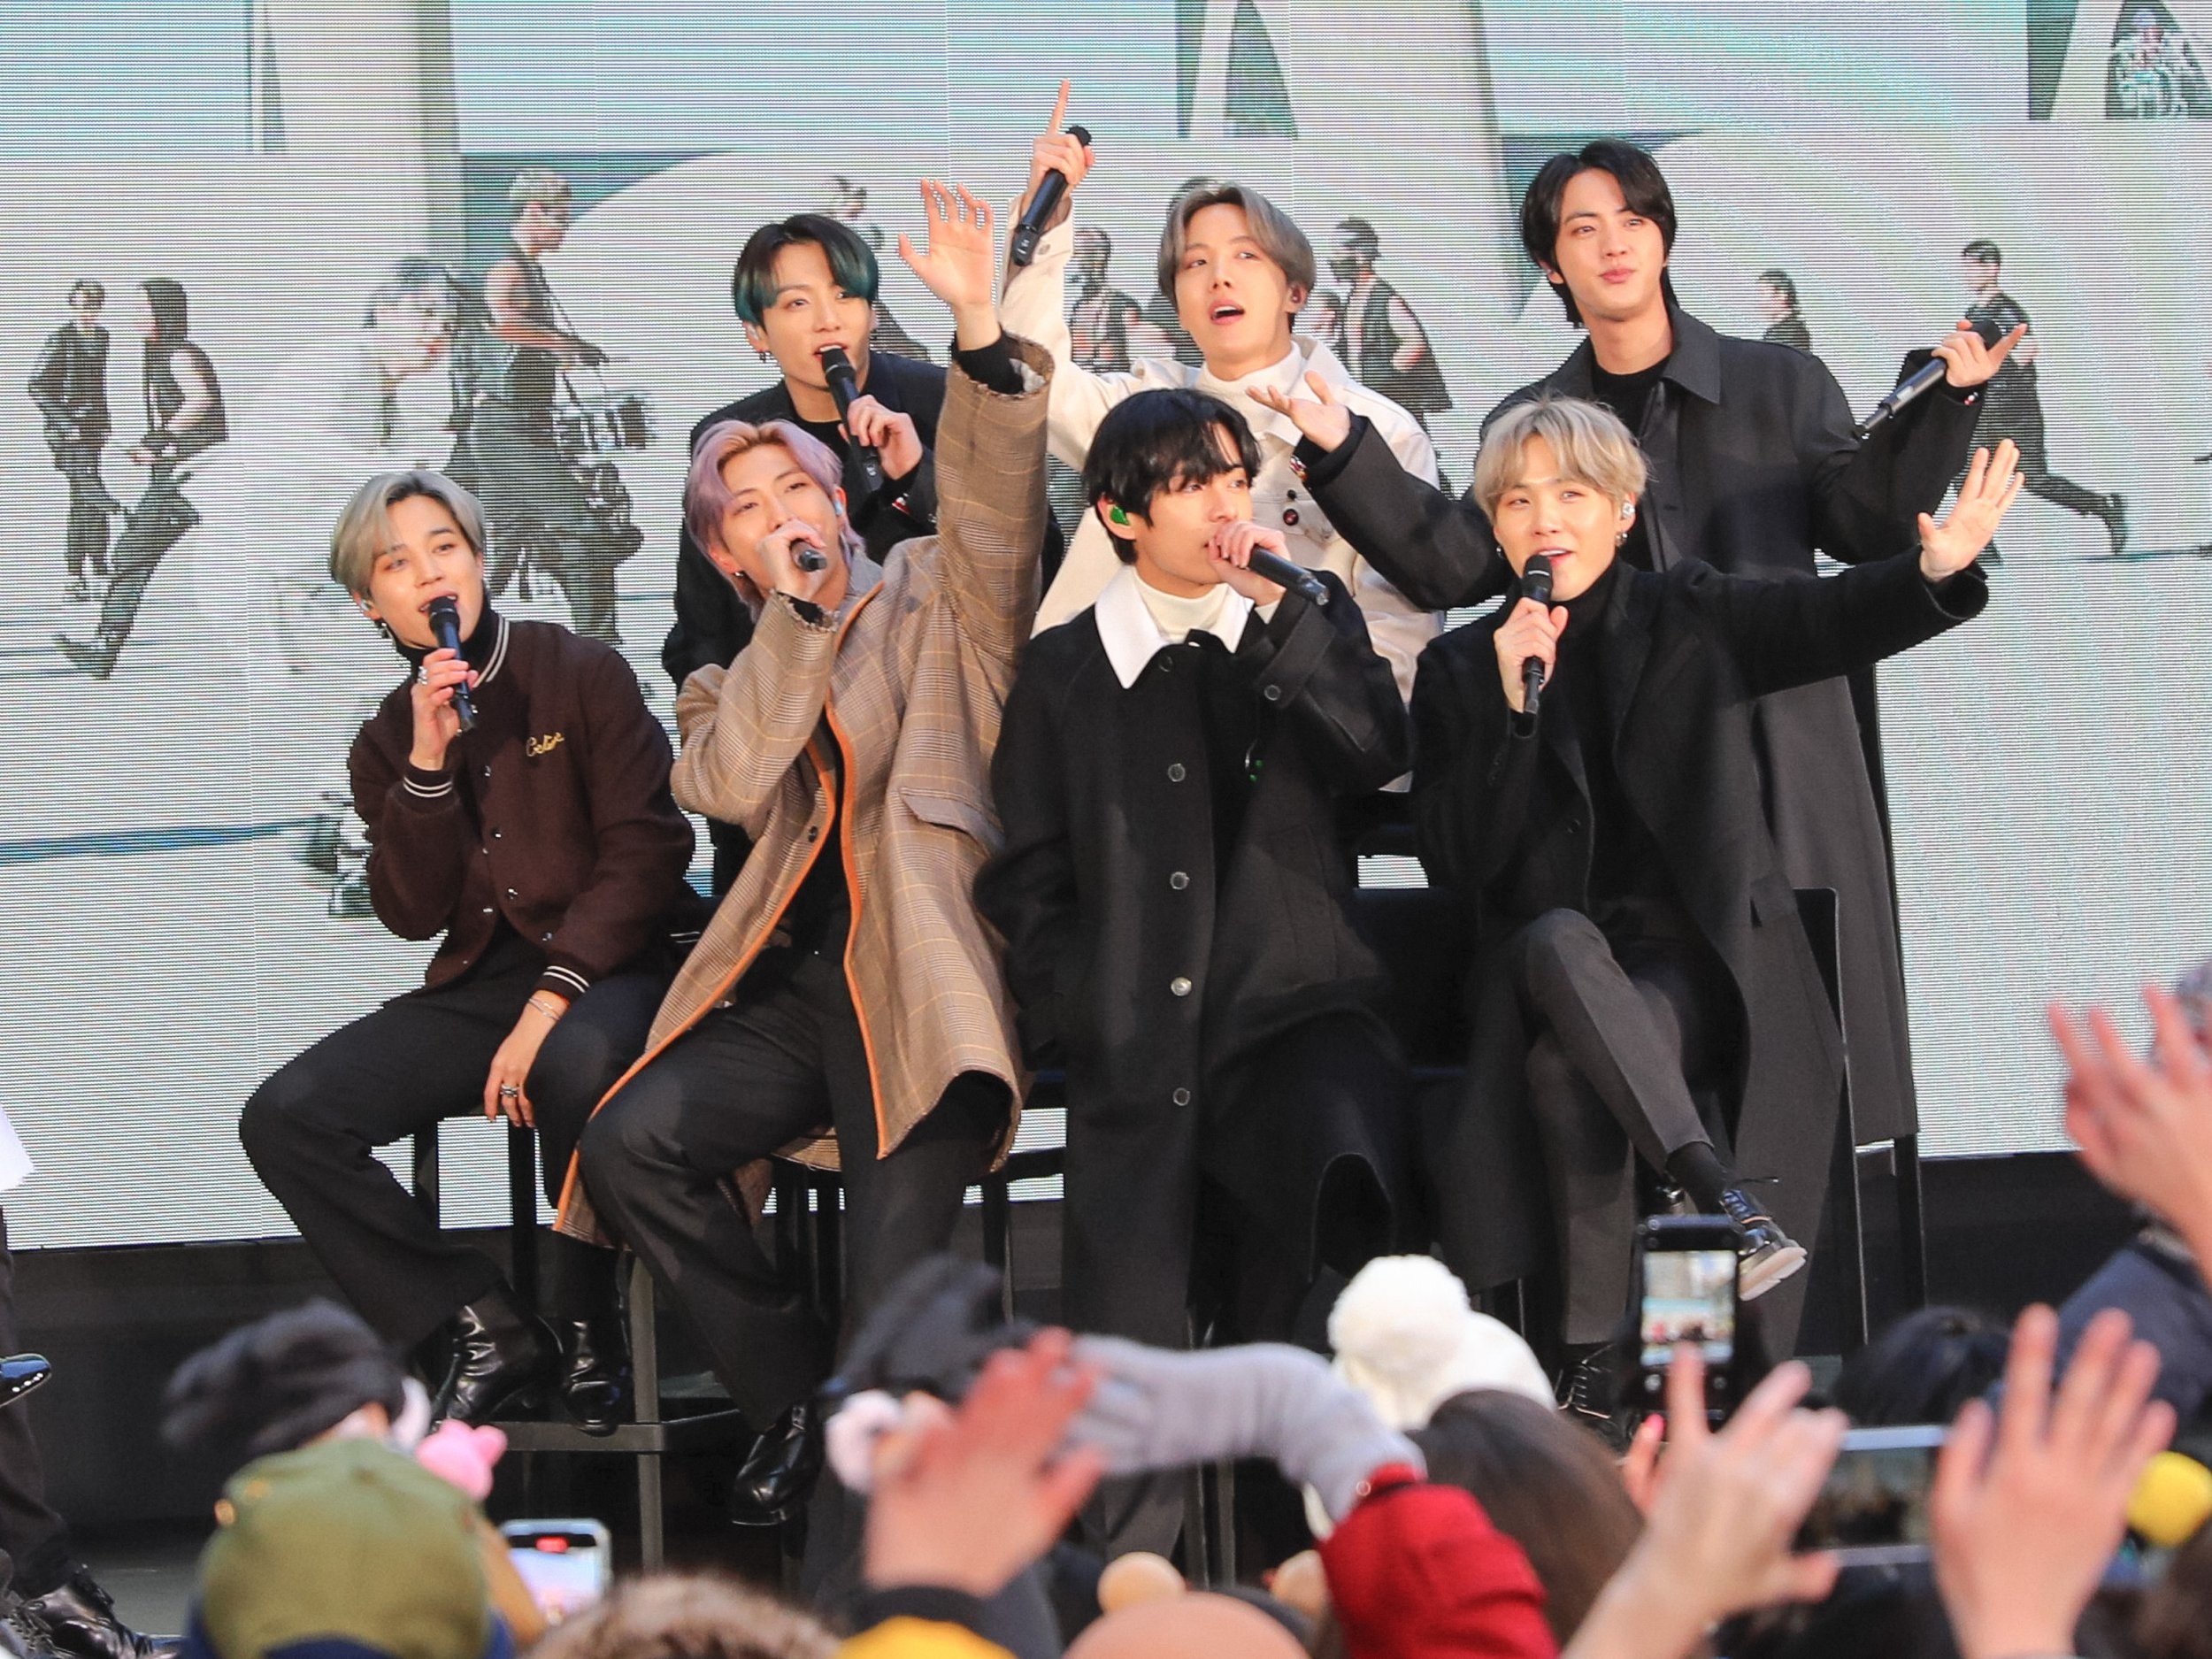 NEW YORK, NY - FEBRUARY 21: Jin, Suga, J-Hope, RM, Jimin, V and Jungkook of K-Pop band BTS are seen during an interview at the 'Today' Show on February 21, 2020 in New York City. (Photo by Jose Perez/Bauer-Griffin/GC Images)